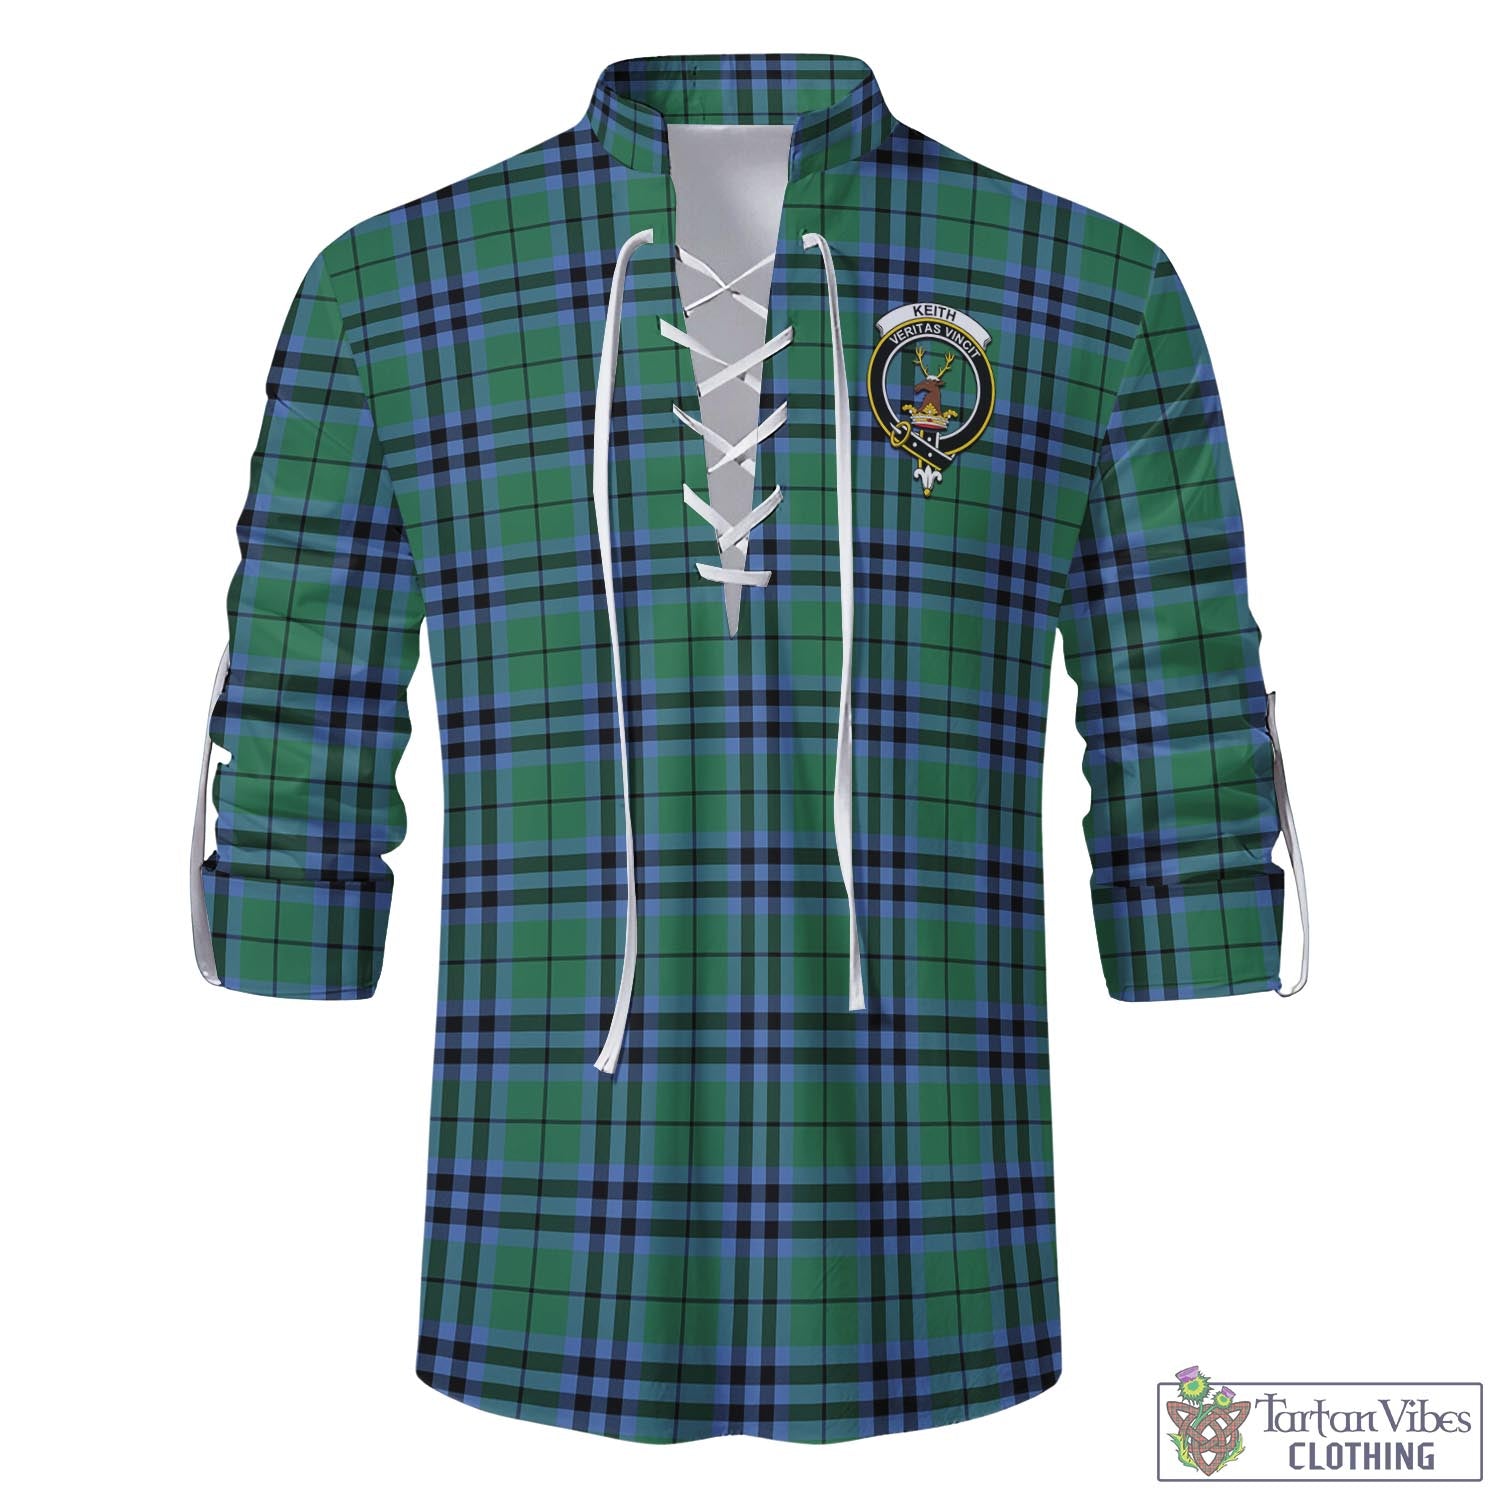 Tartan Vibes Clothing Keith Ancient Tartan Men's Scottish Traditional Jacobite Ghillie Kilt Shirt with Family Crest